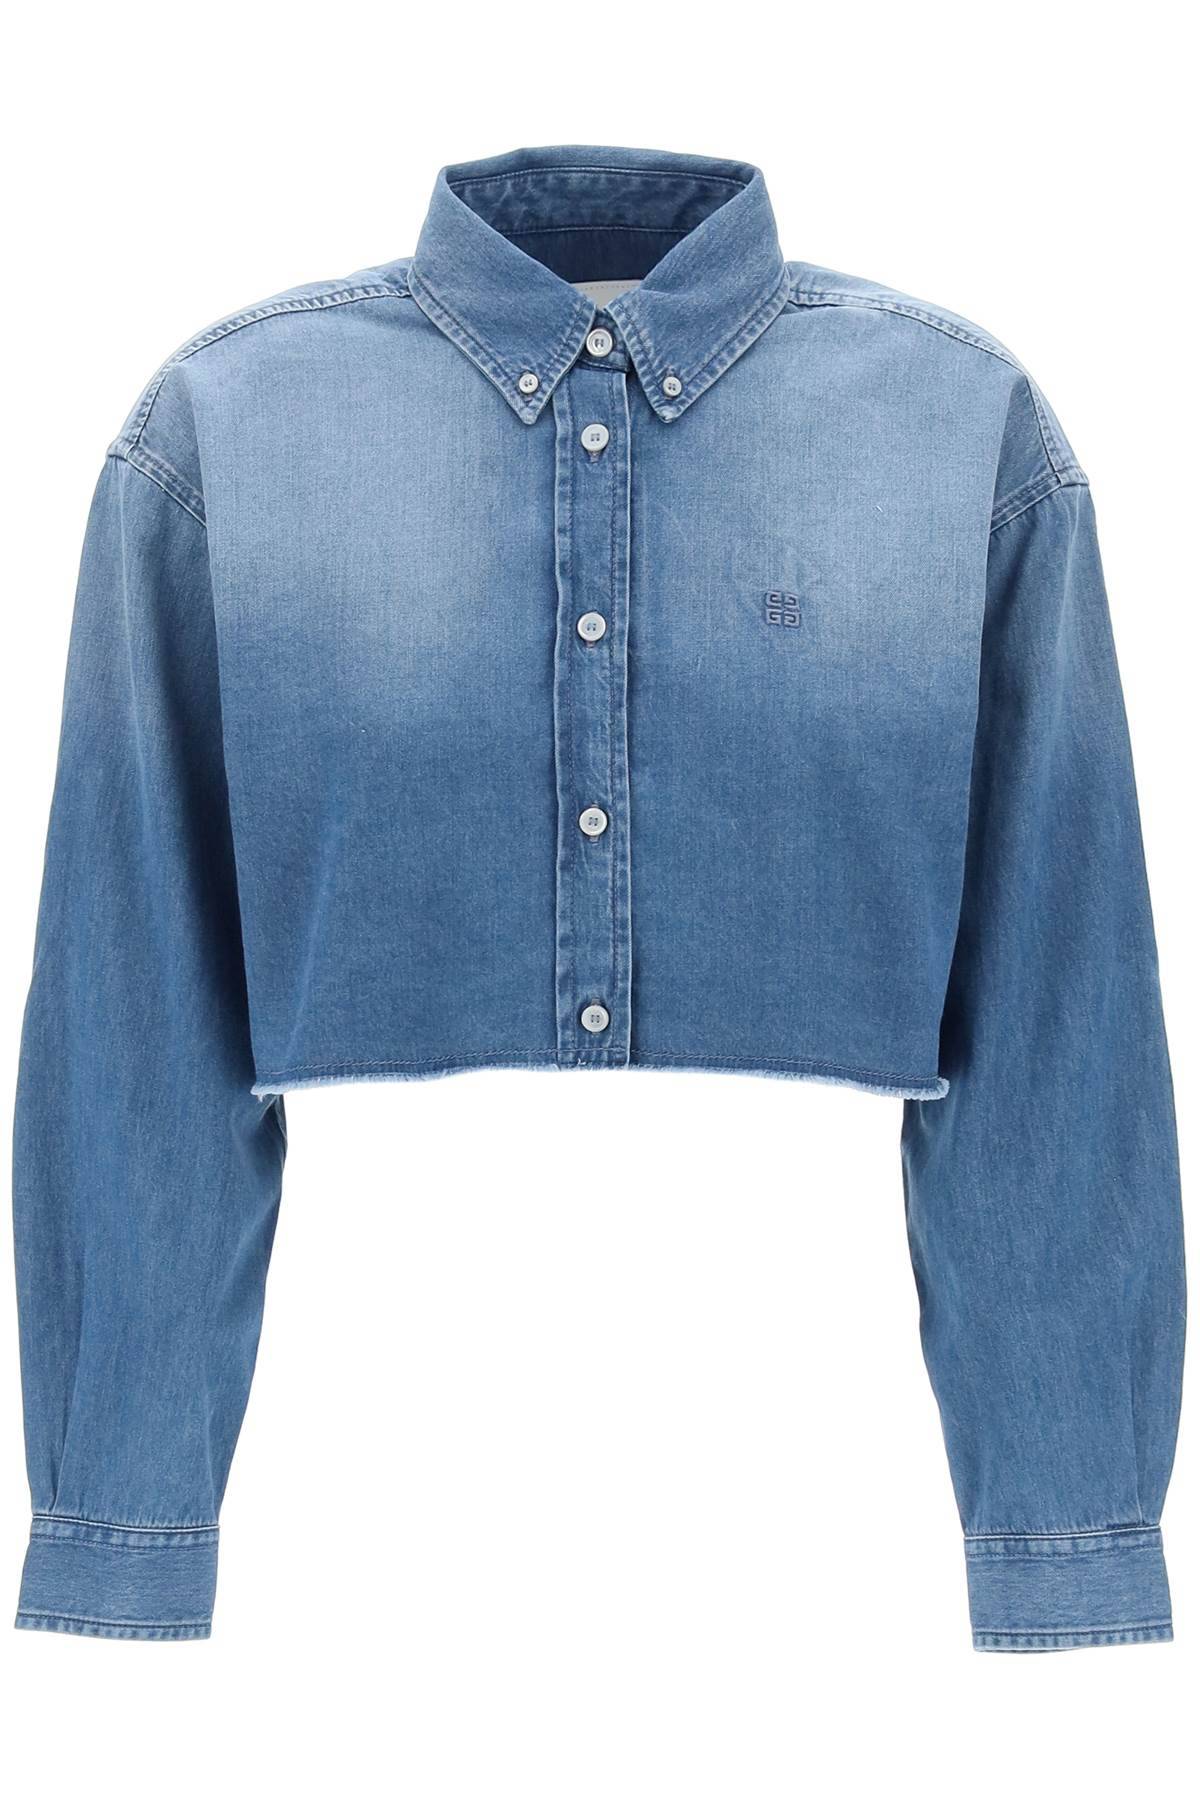 Givenchy Denim Cropped Shirt For Women In Blue